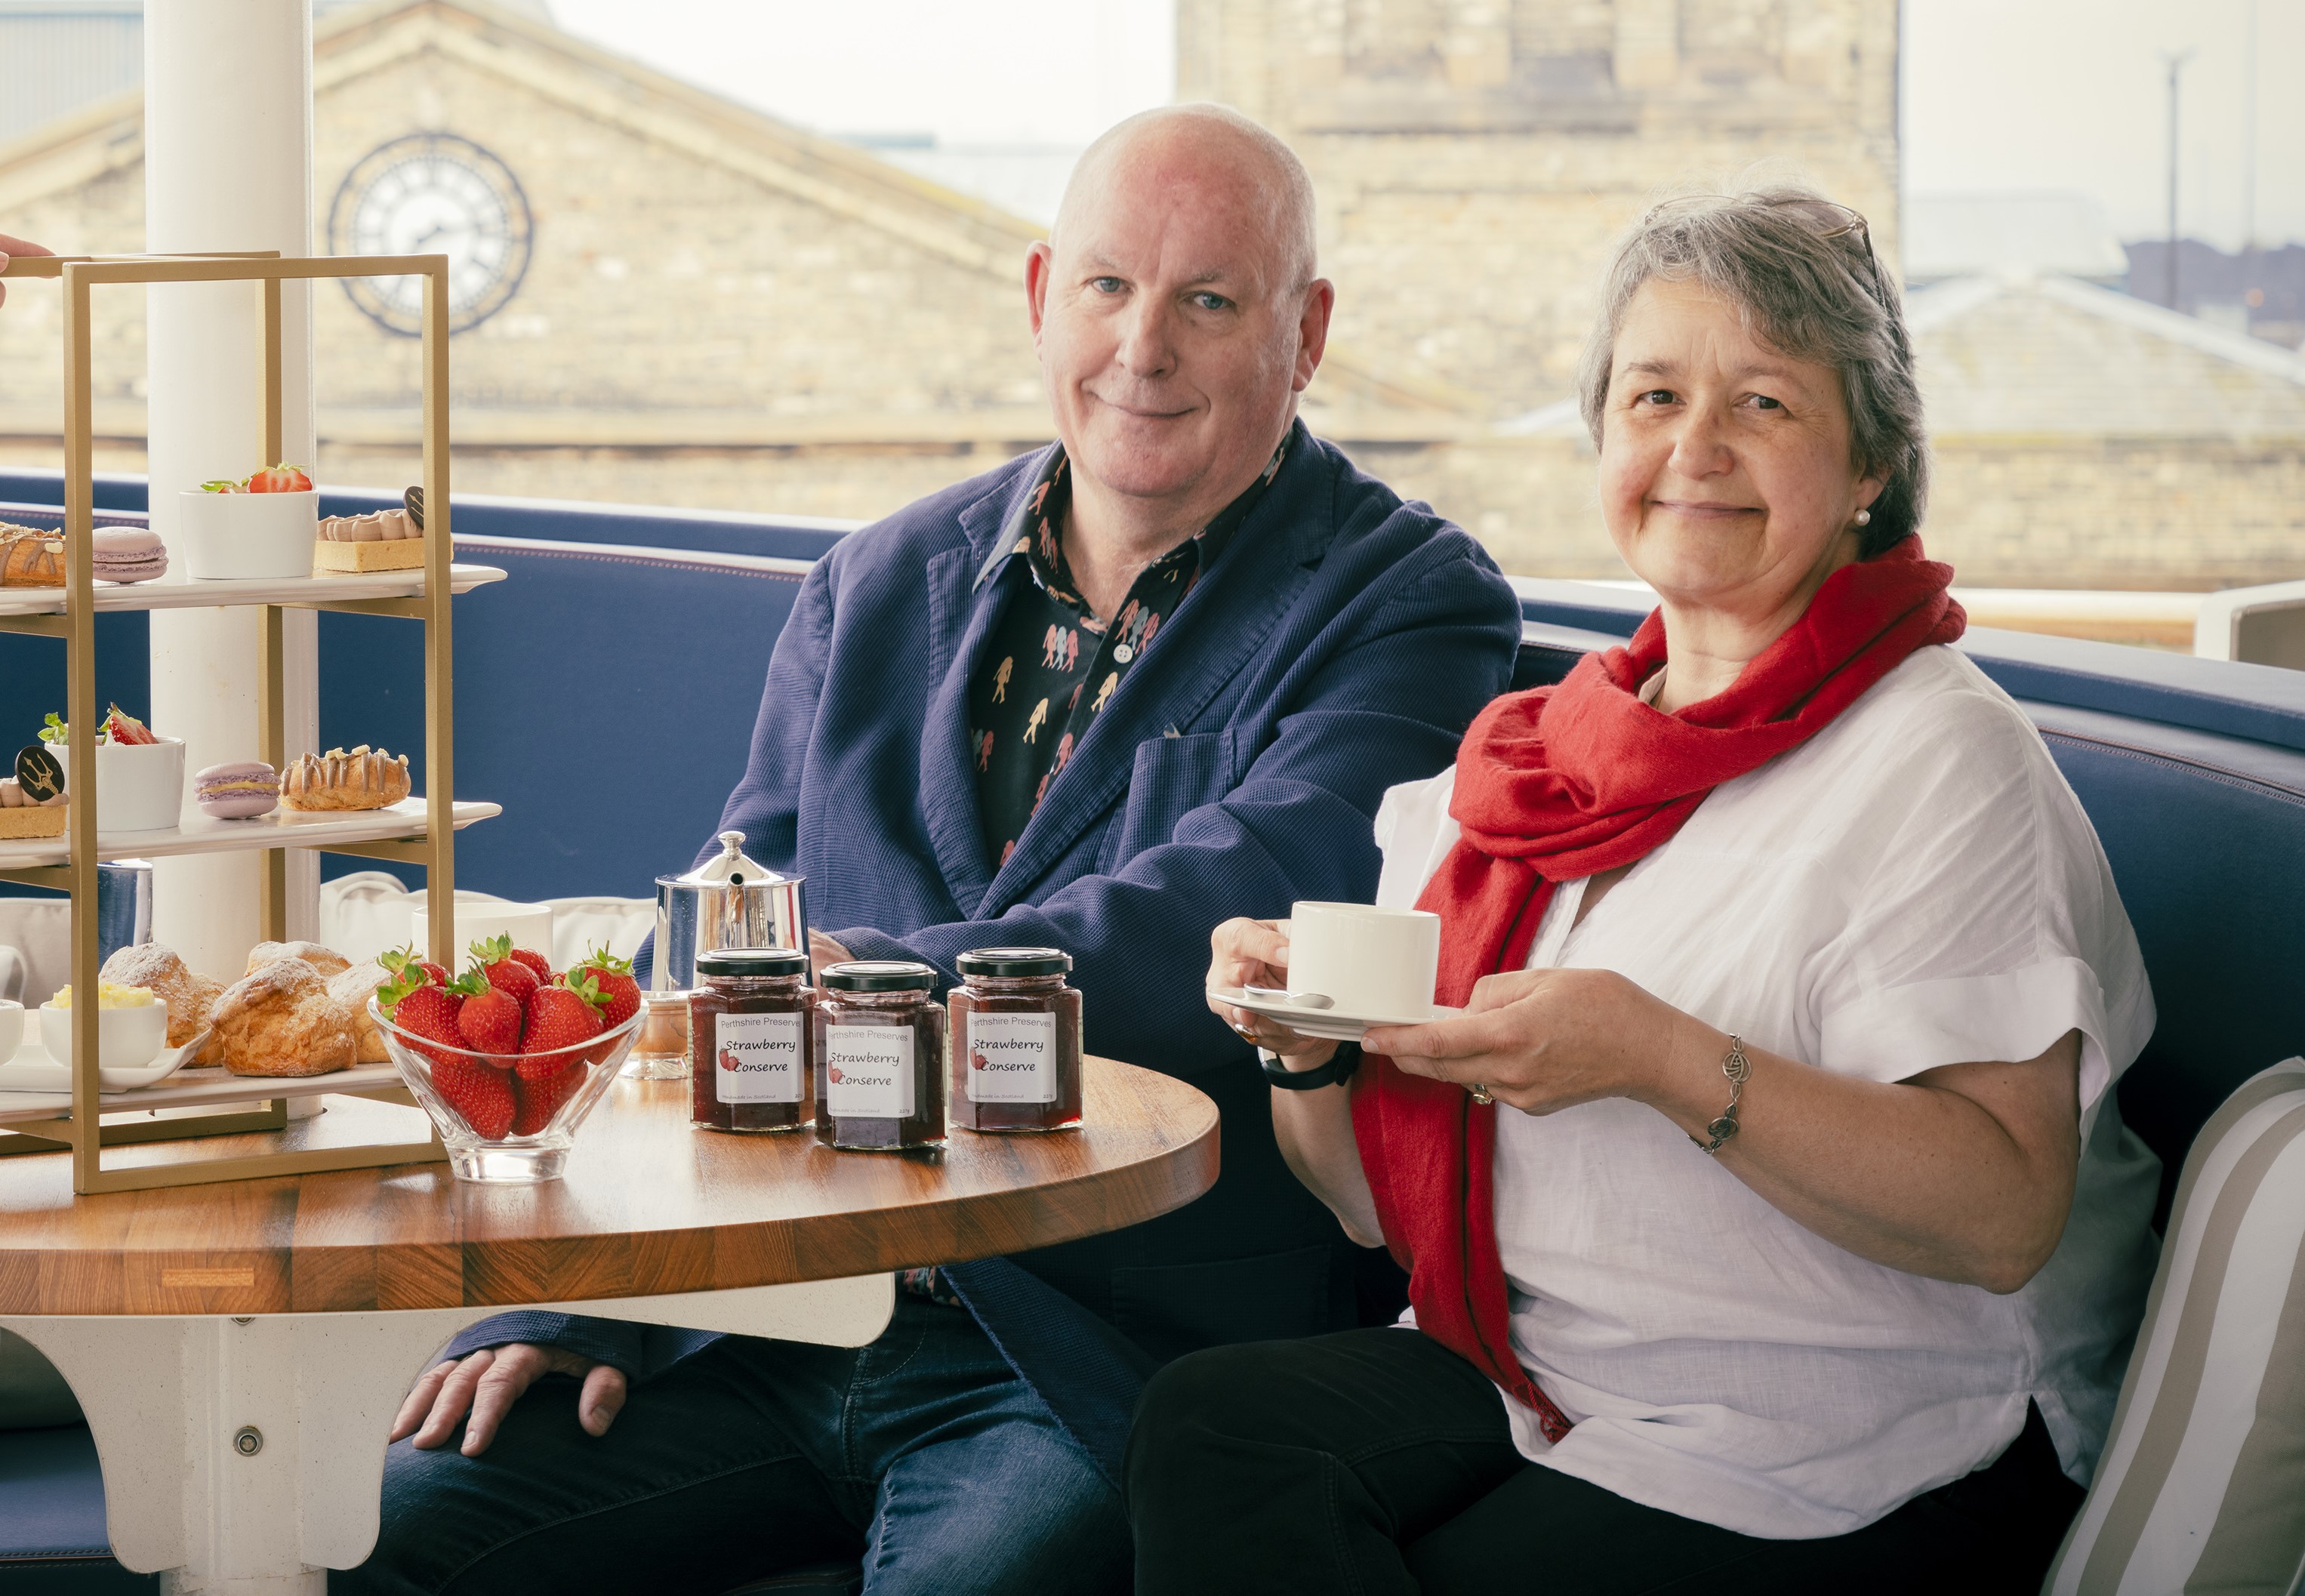 Owners of Perthshire Preserves with jars of their jam and Afternoon Tea stand aboard Fingal